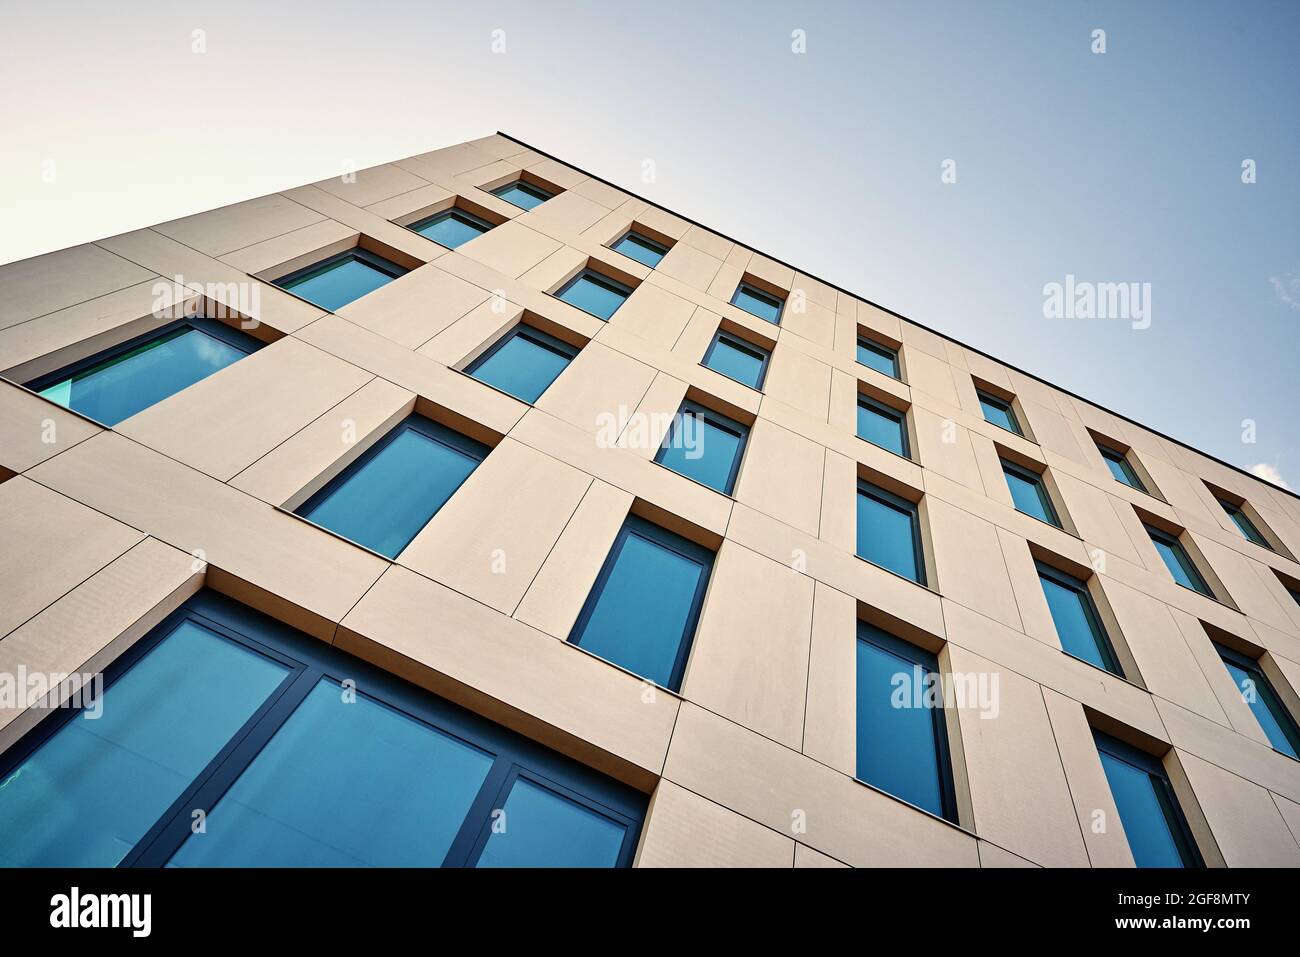 Facade of office building. Windows pattern on the residential building. Modern architecture style Stock Photo